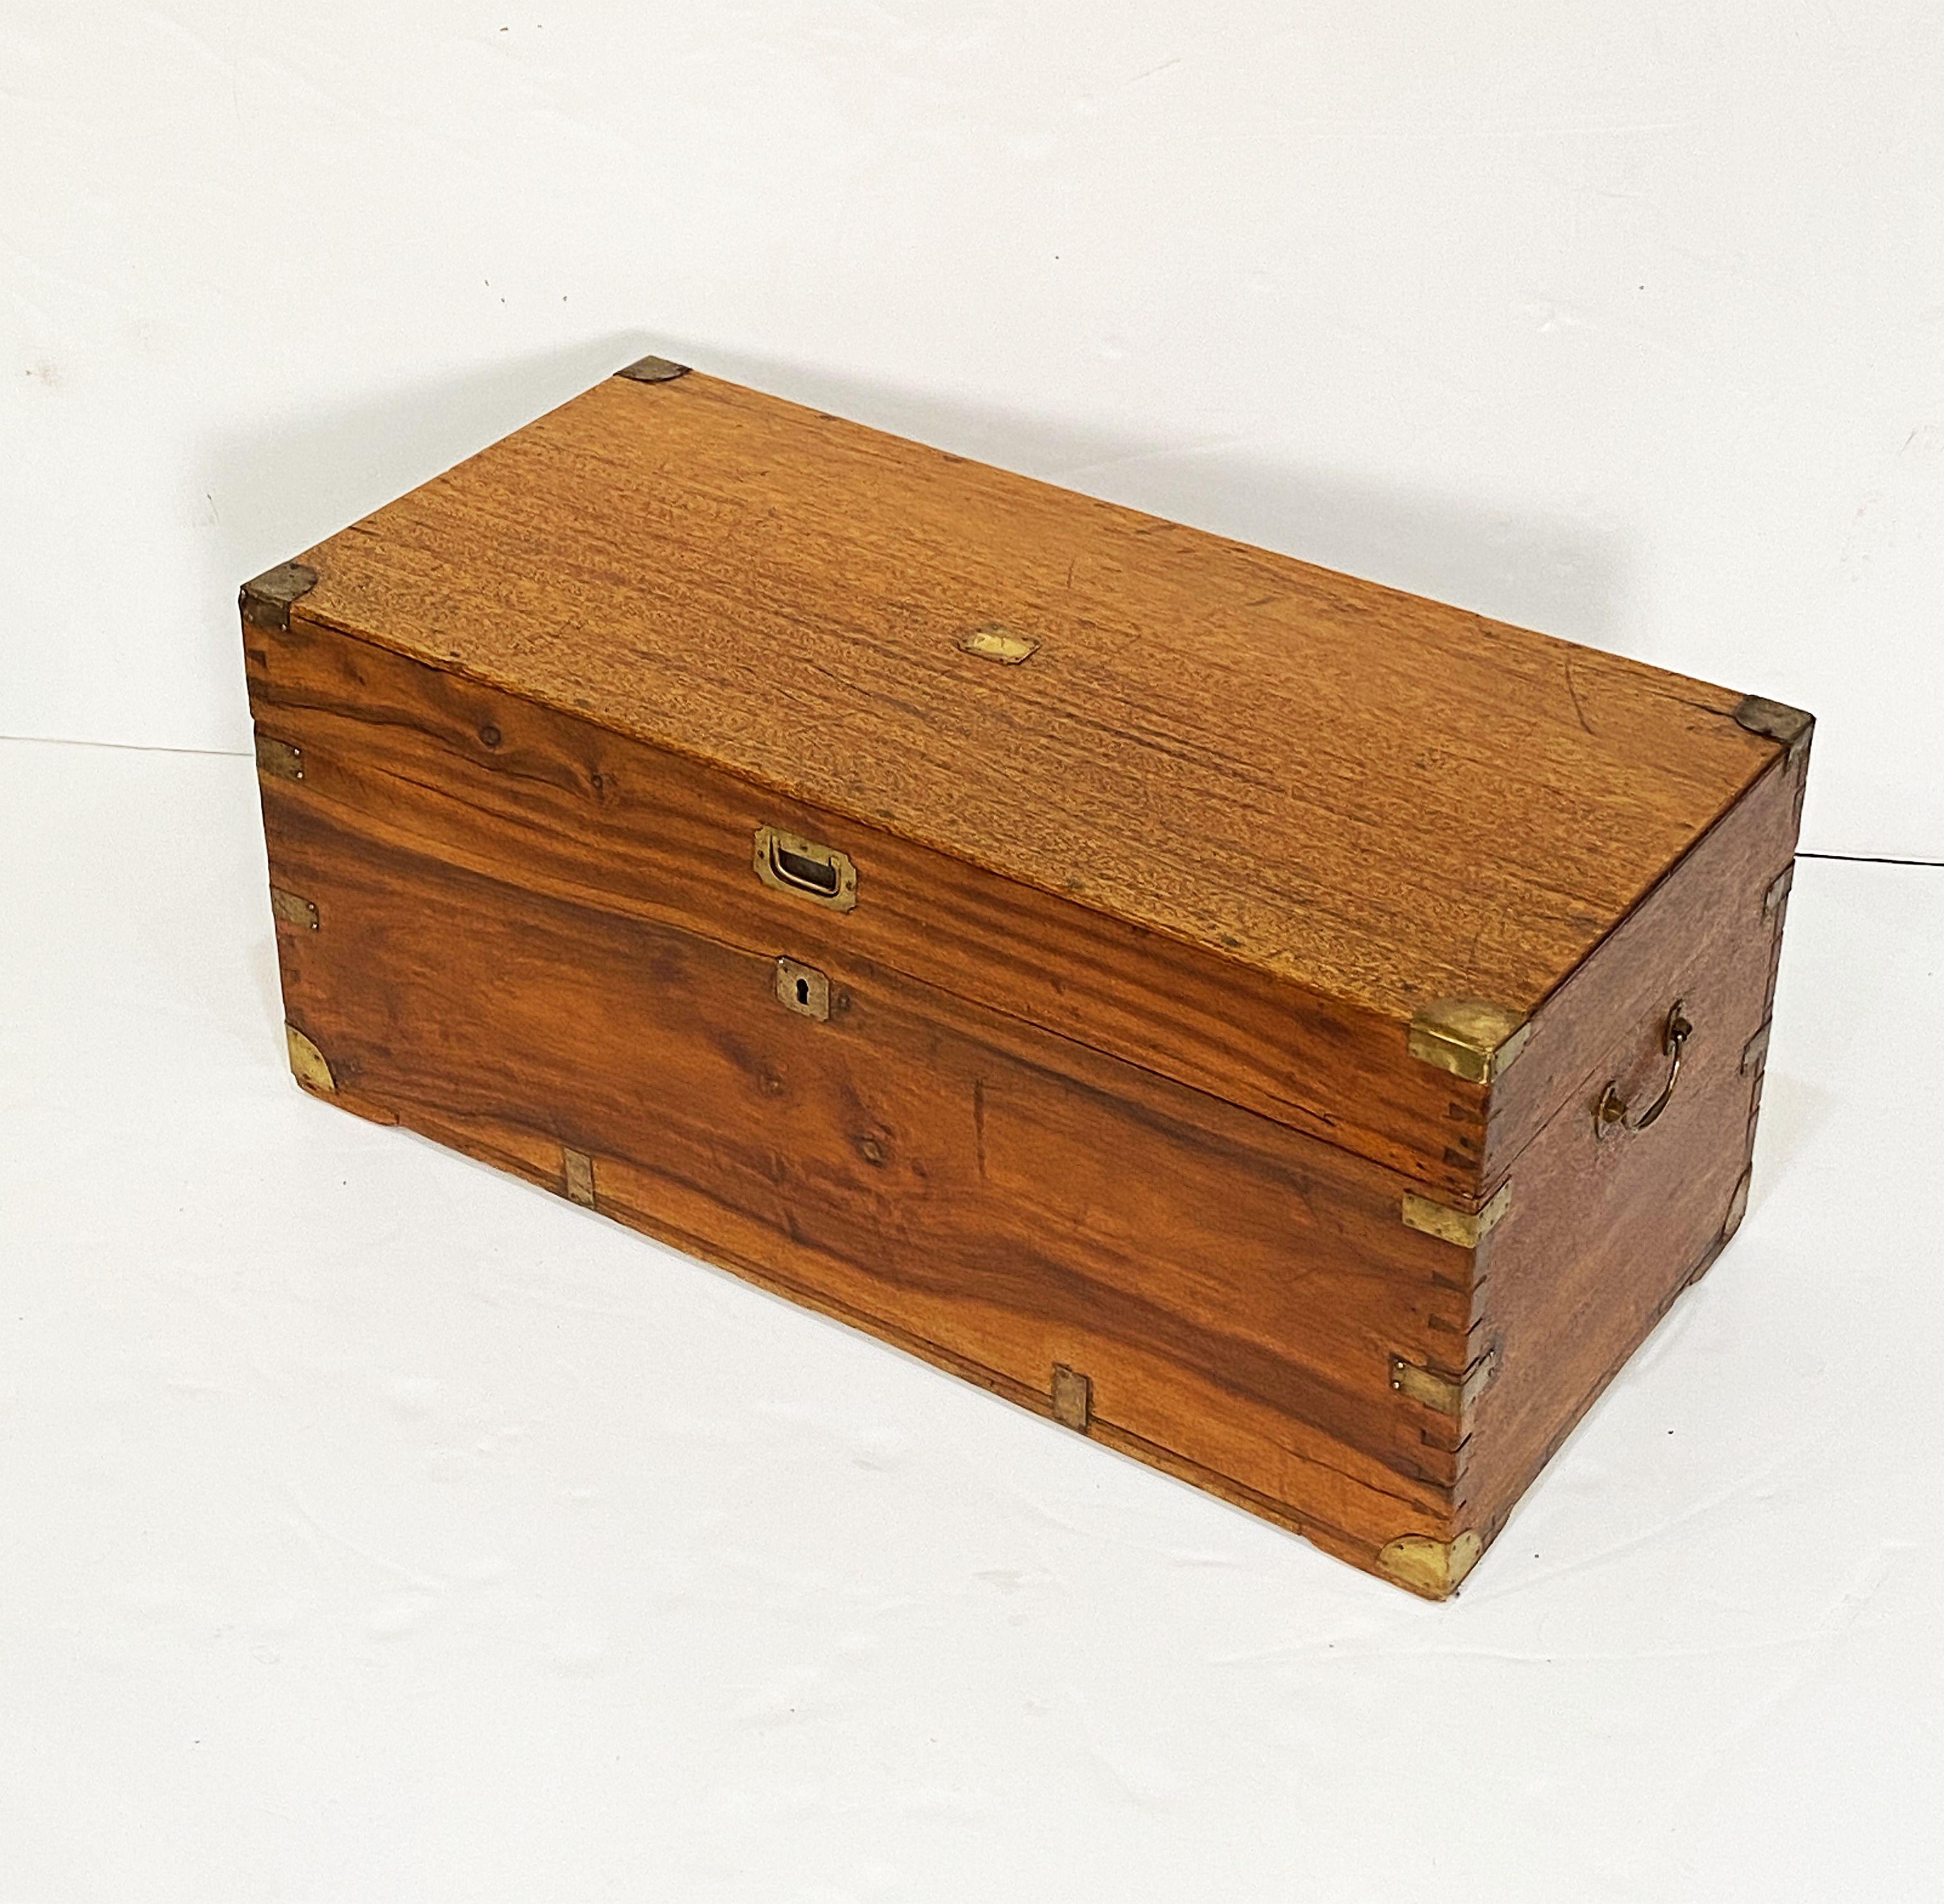 A large handsome rectangular British military officer's Campaign trunk of camphorwood featuring hand-cut brass binding and hardware, with interior compartments, and resting on bracket feet.

Campaign-era trunks and coffers were the travel items of